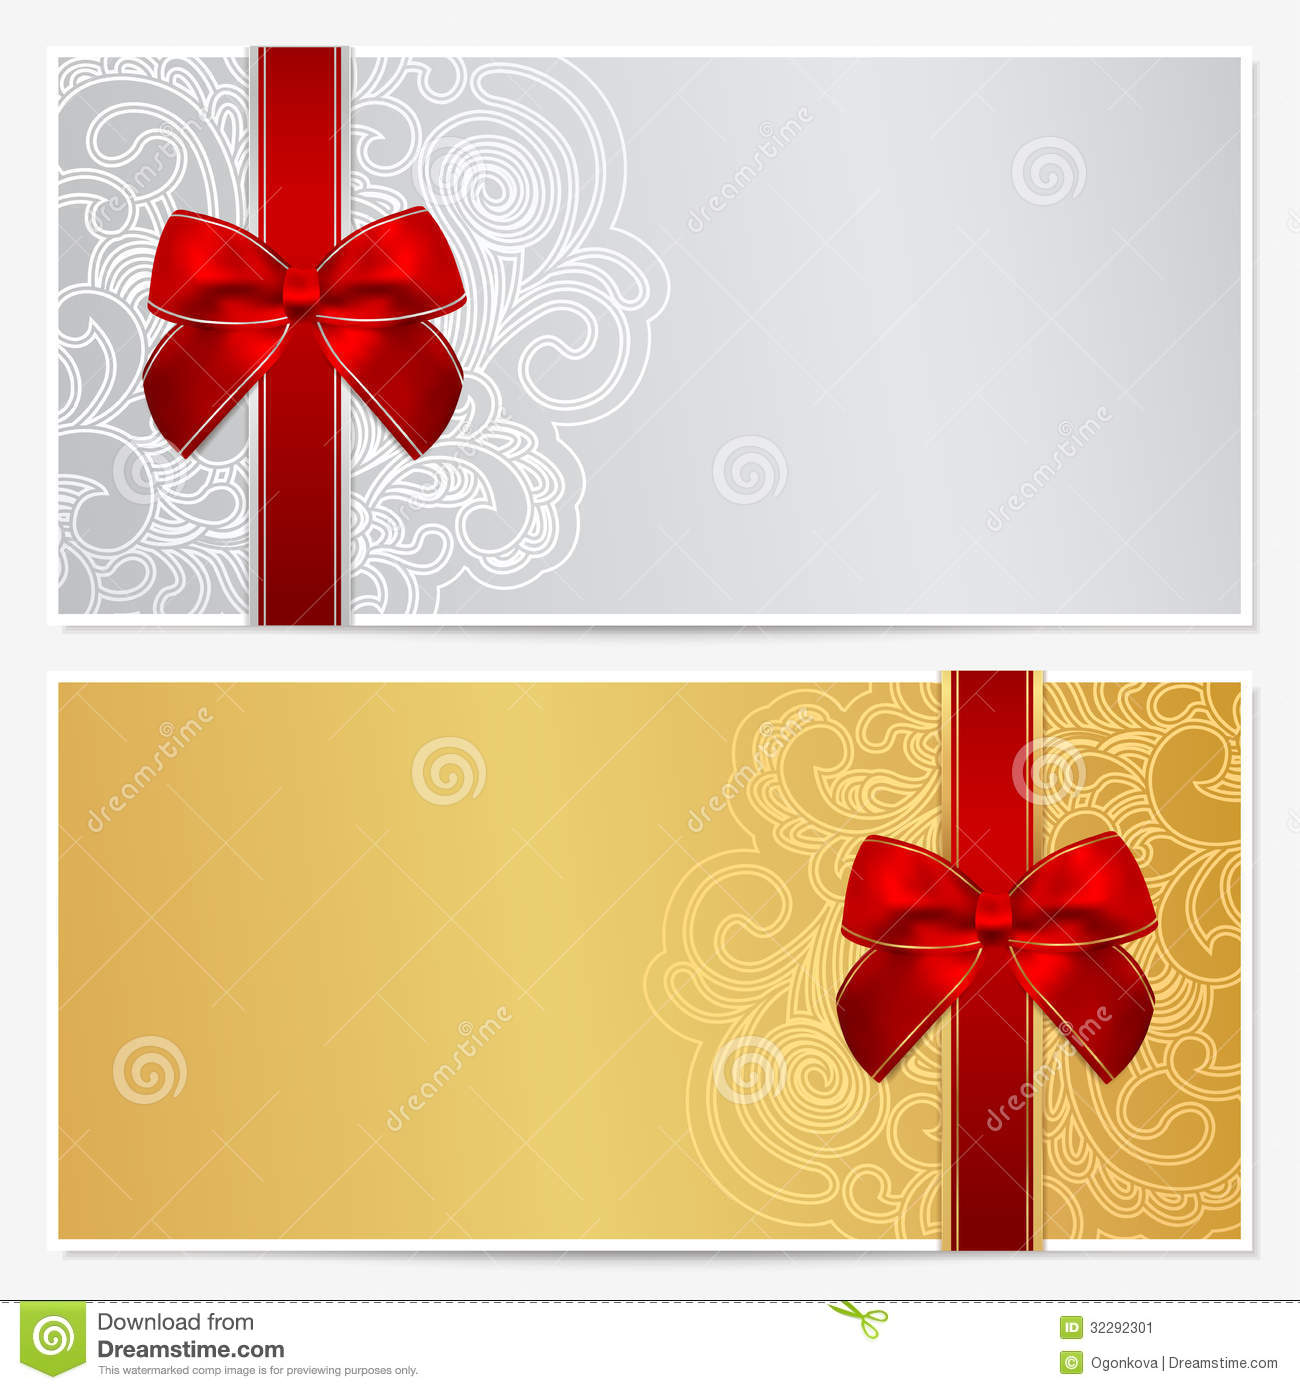 Voucher Gift Certificate Coupon Template With Border Frame Bow